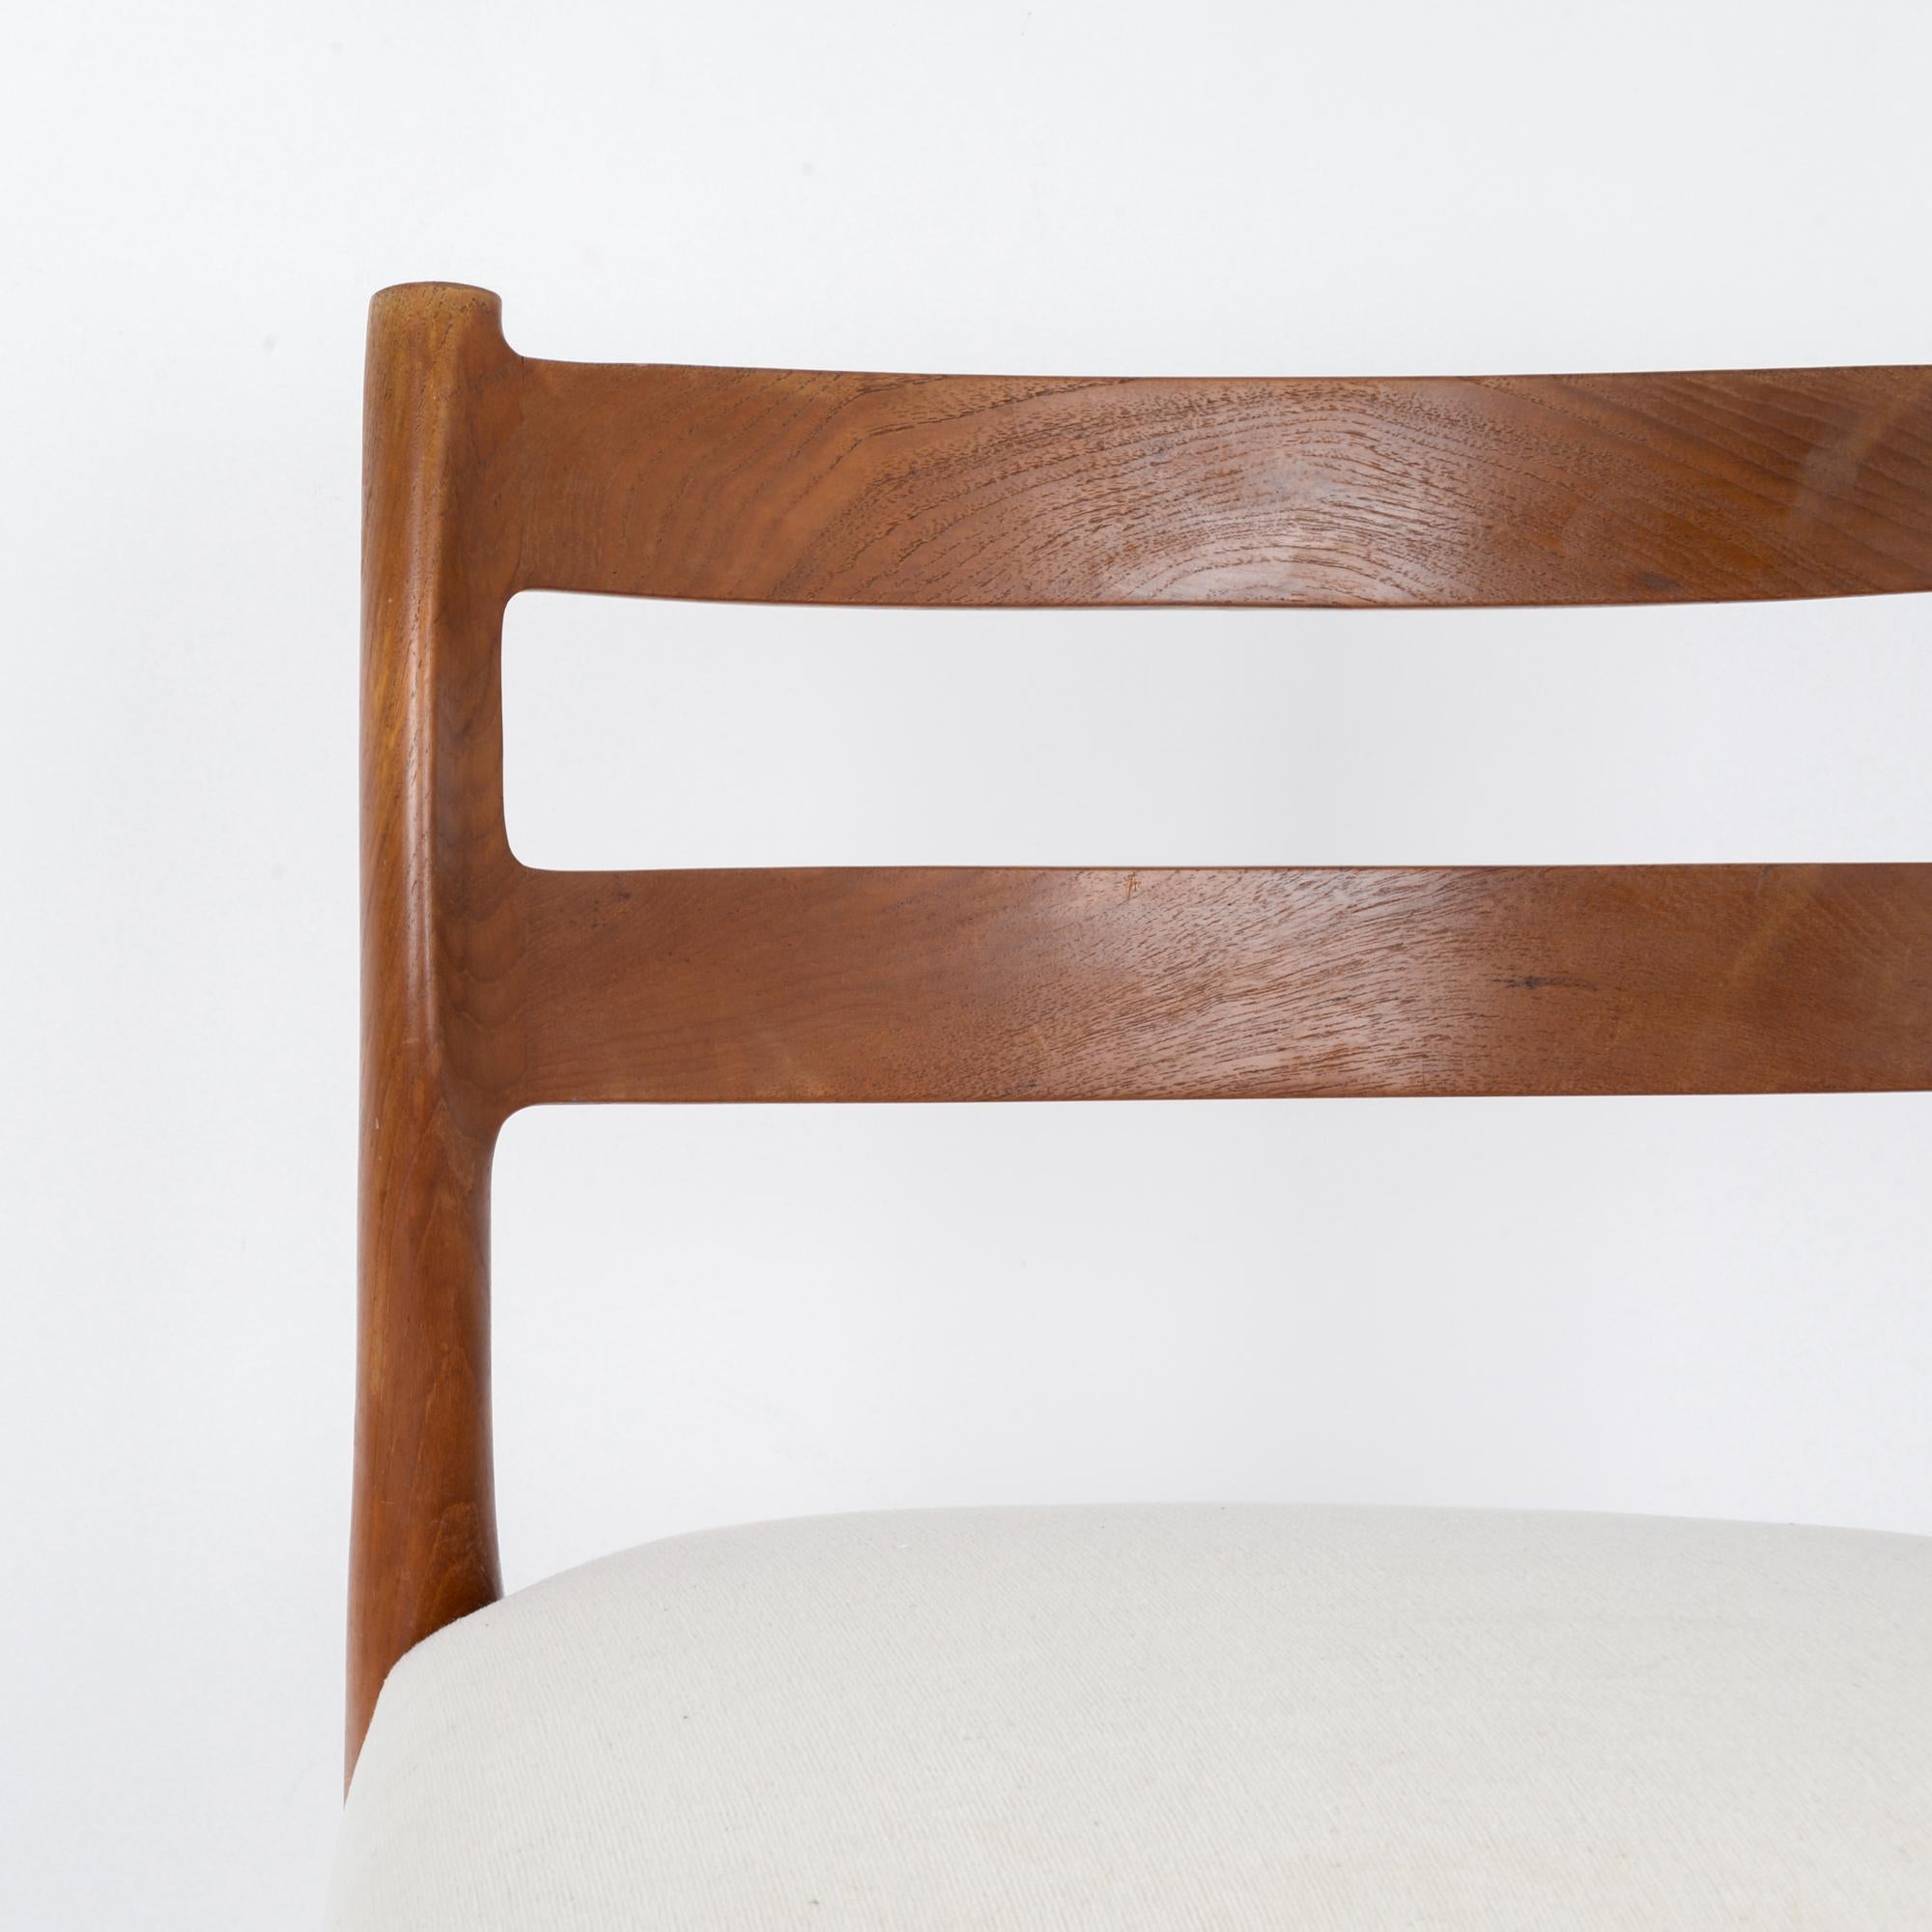 1960s Danish Wooden Chair with Upholstered Seat For Sale 1